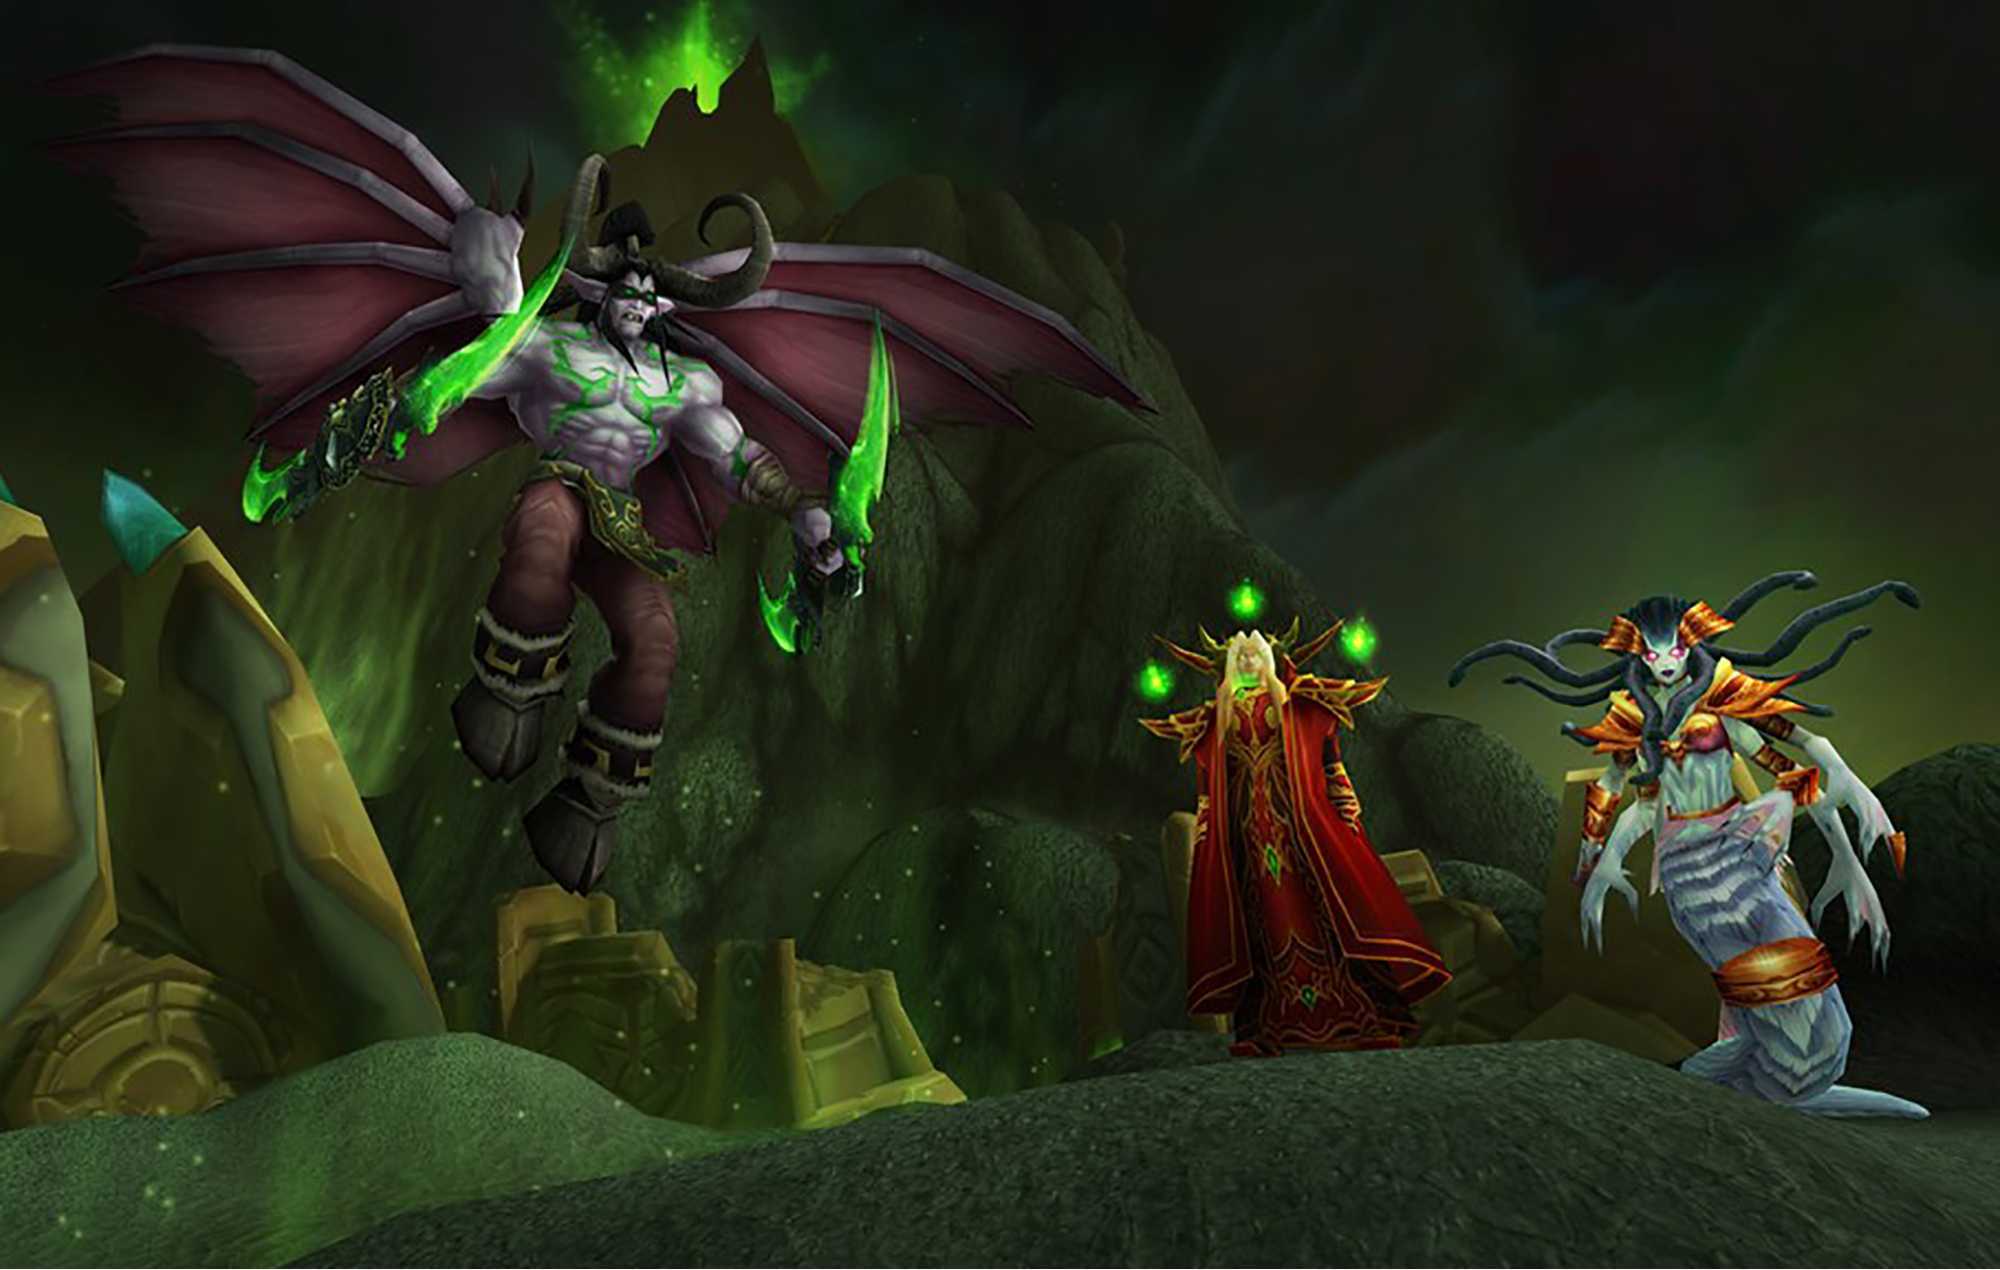 Fire mage dps talent builds and glyphs - wrath of the lich king classic - guides - wowhead